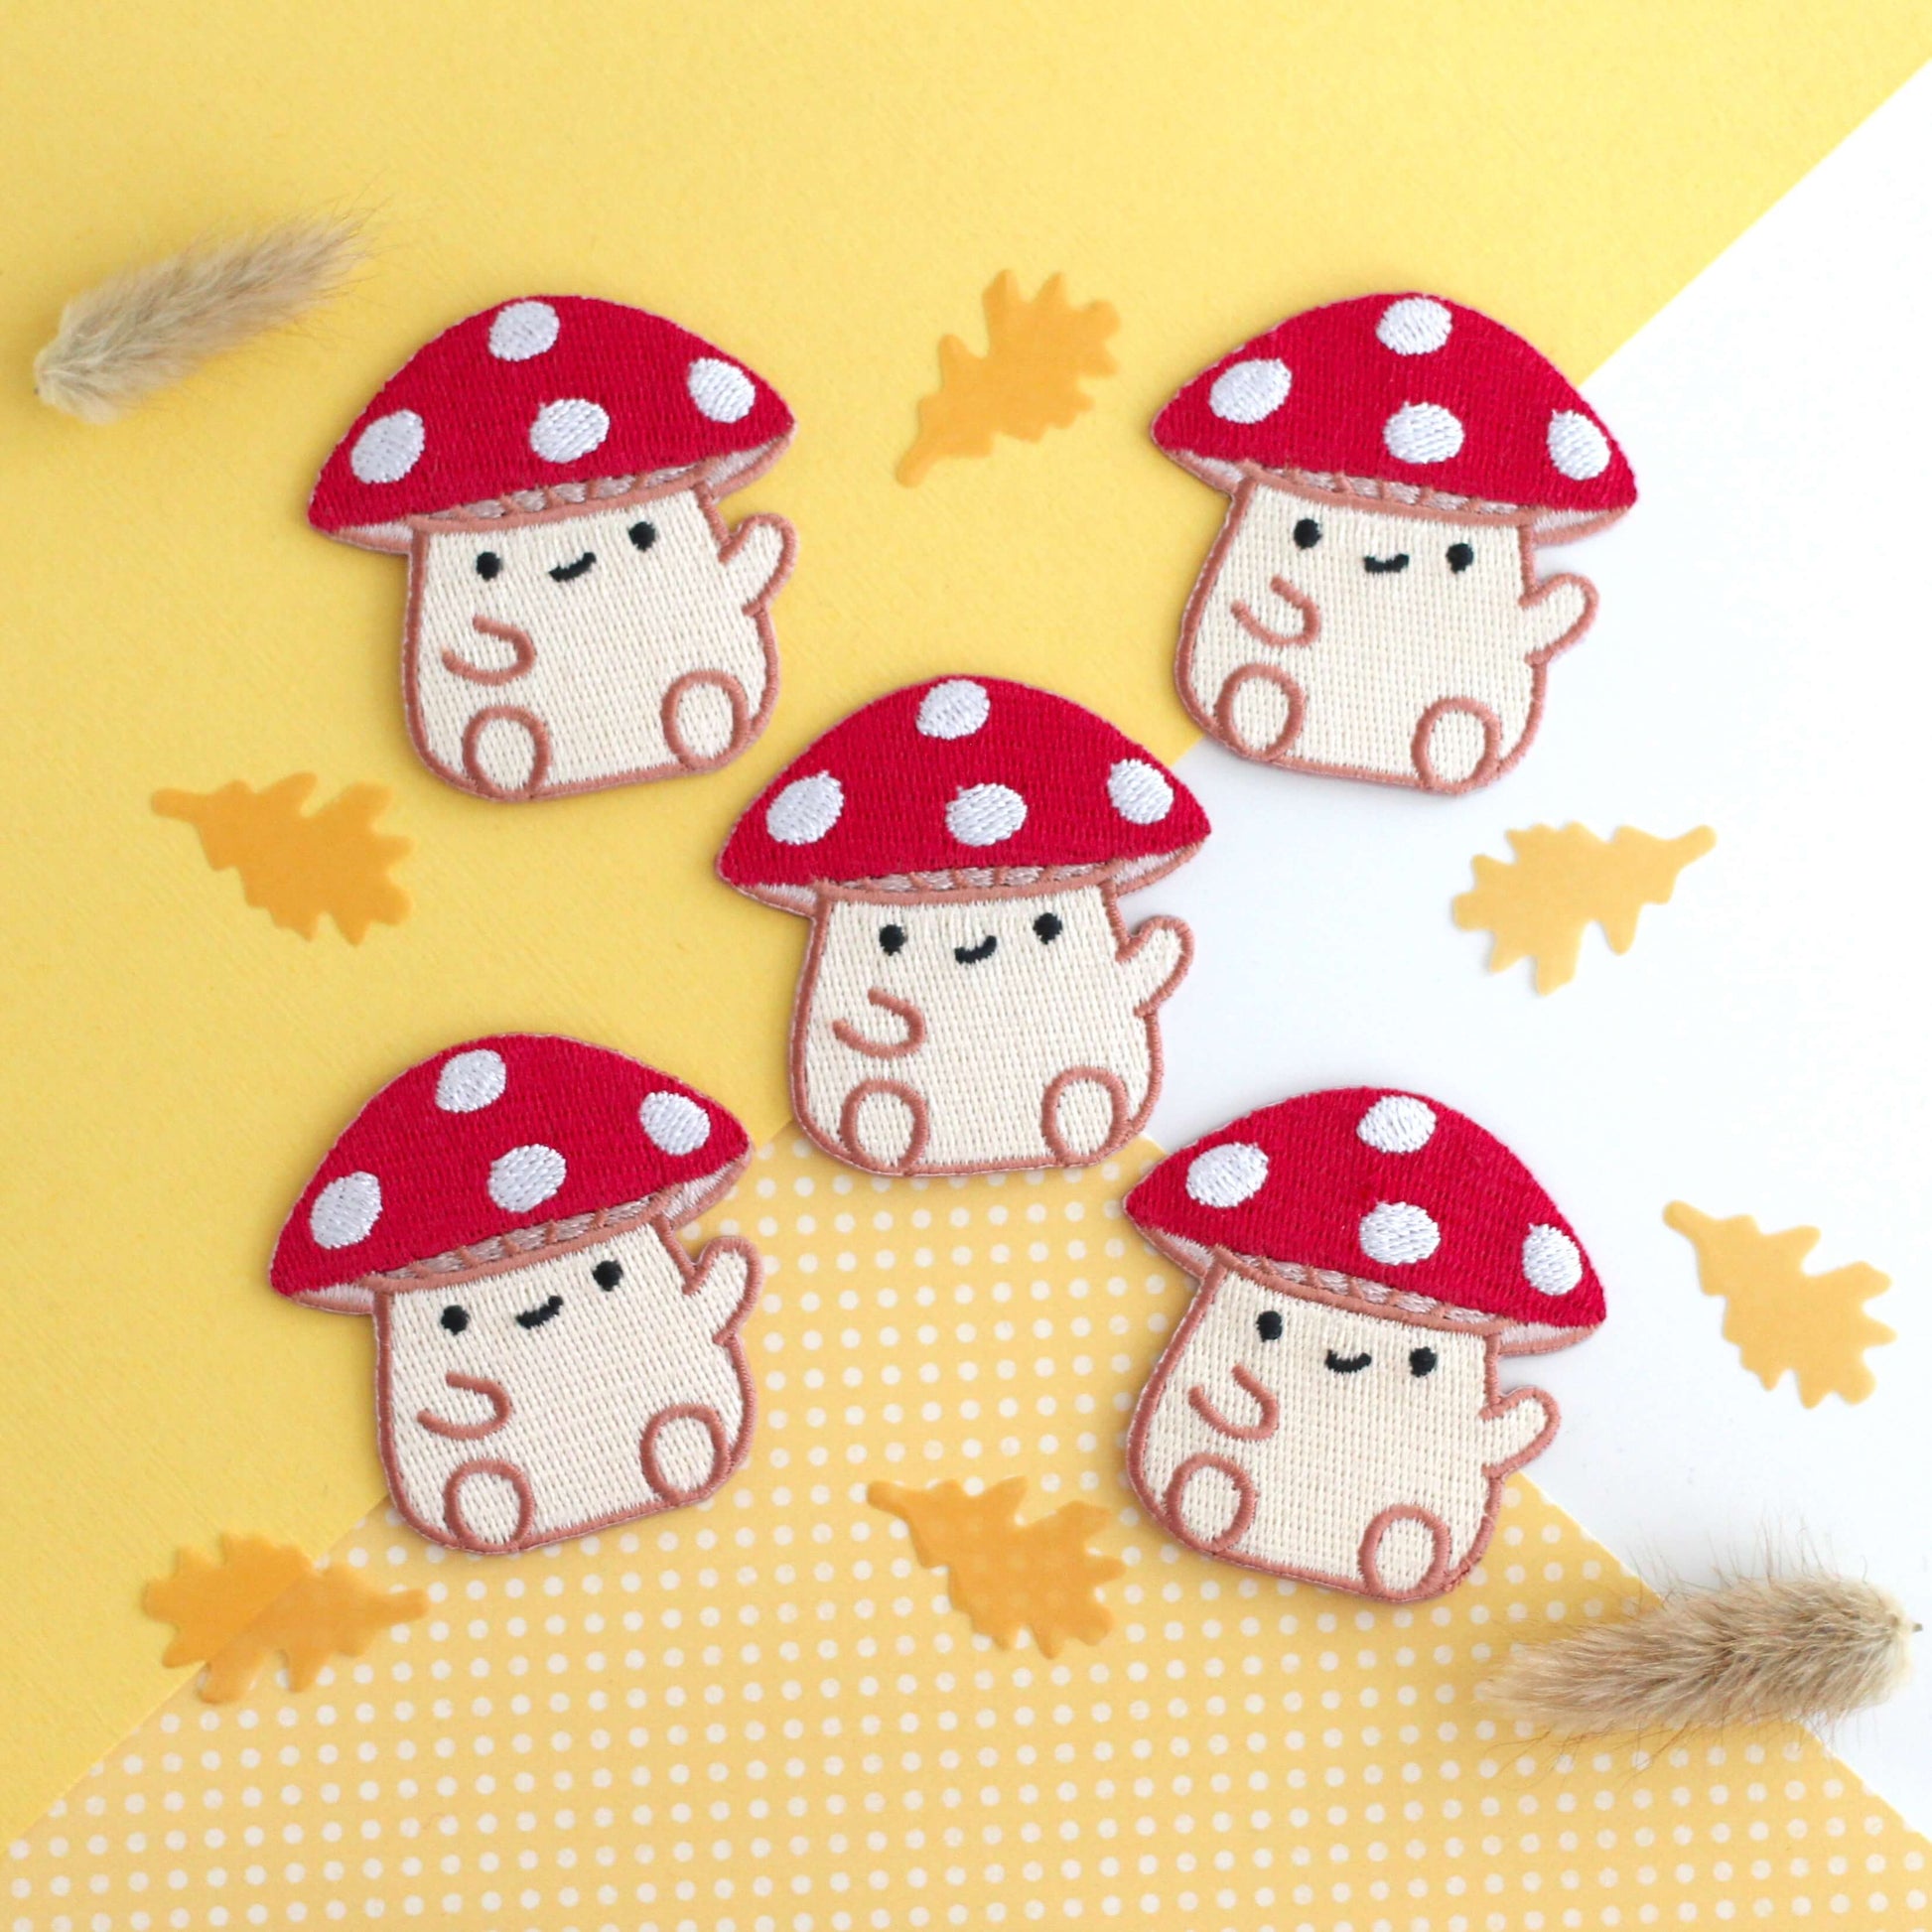 Cute Red Cap Mushroom Iron On Patch - Cottagecore Embroidered Patch